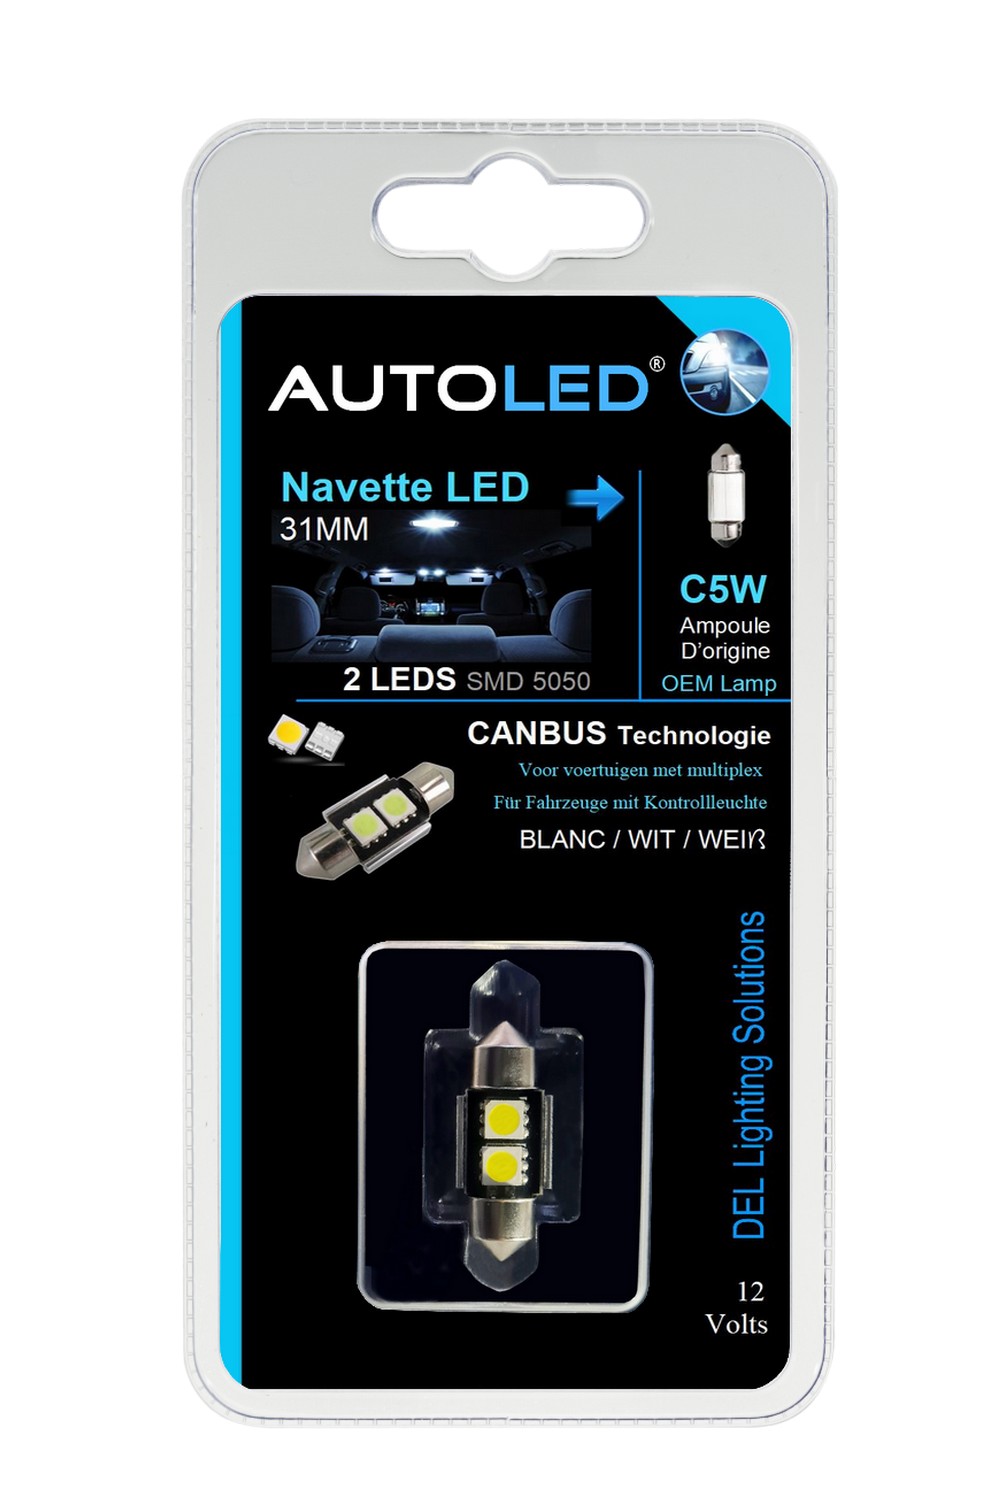 navette-led-31-mm-canbus-autoled-2-leds-smd-5050-blanc-eclairage-interieur-habitacle-plaque-immatriculation-coffre-ref-0010.2